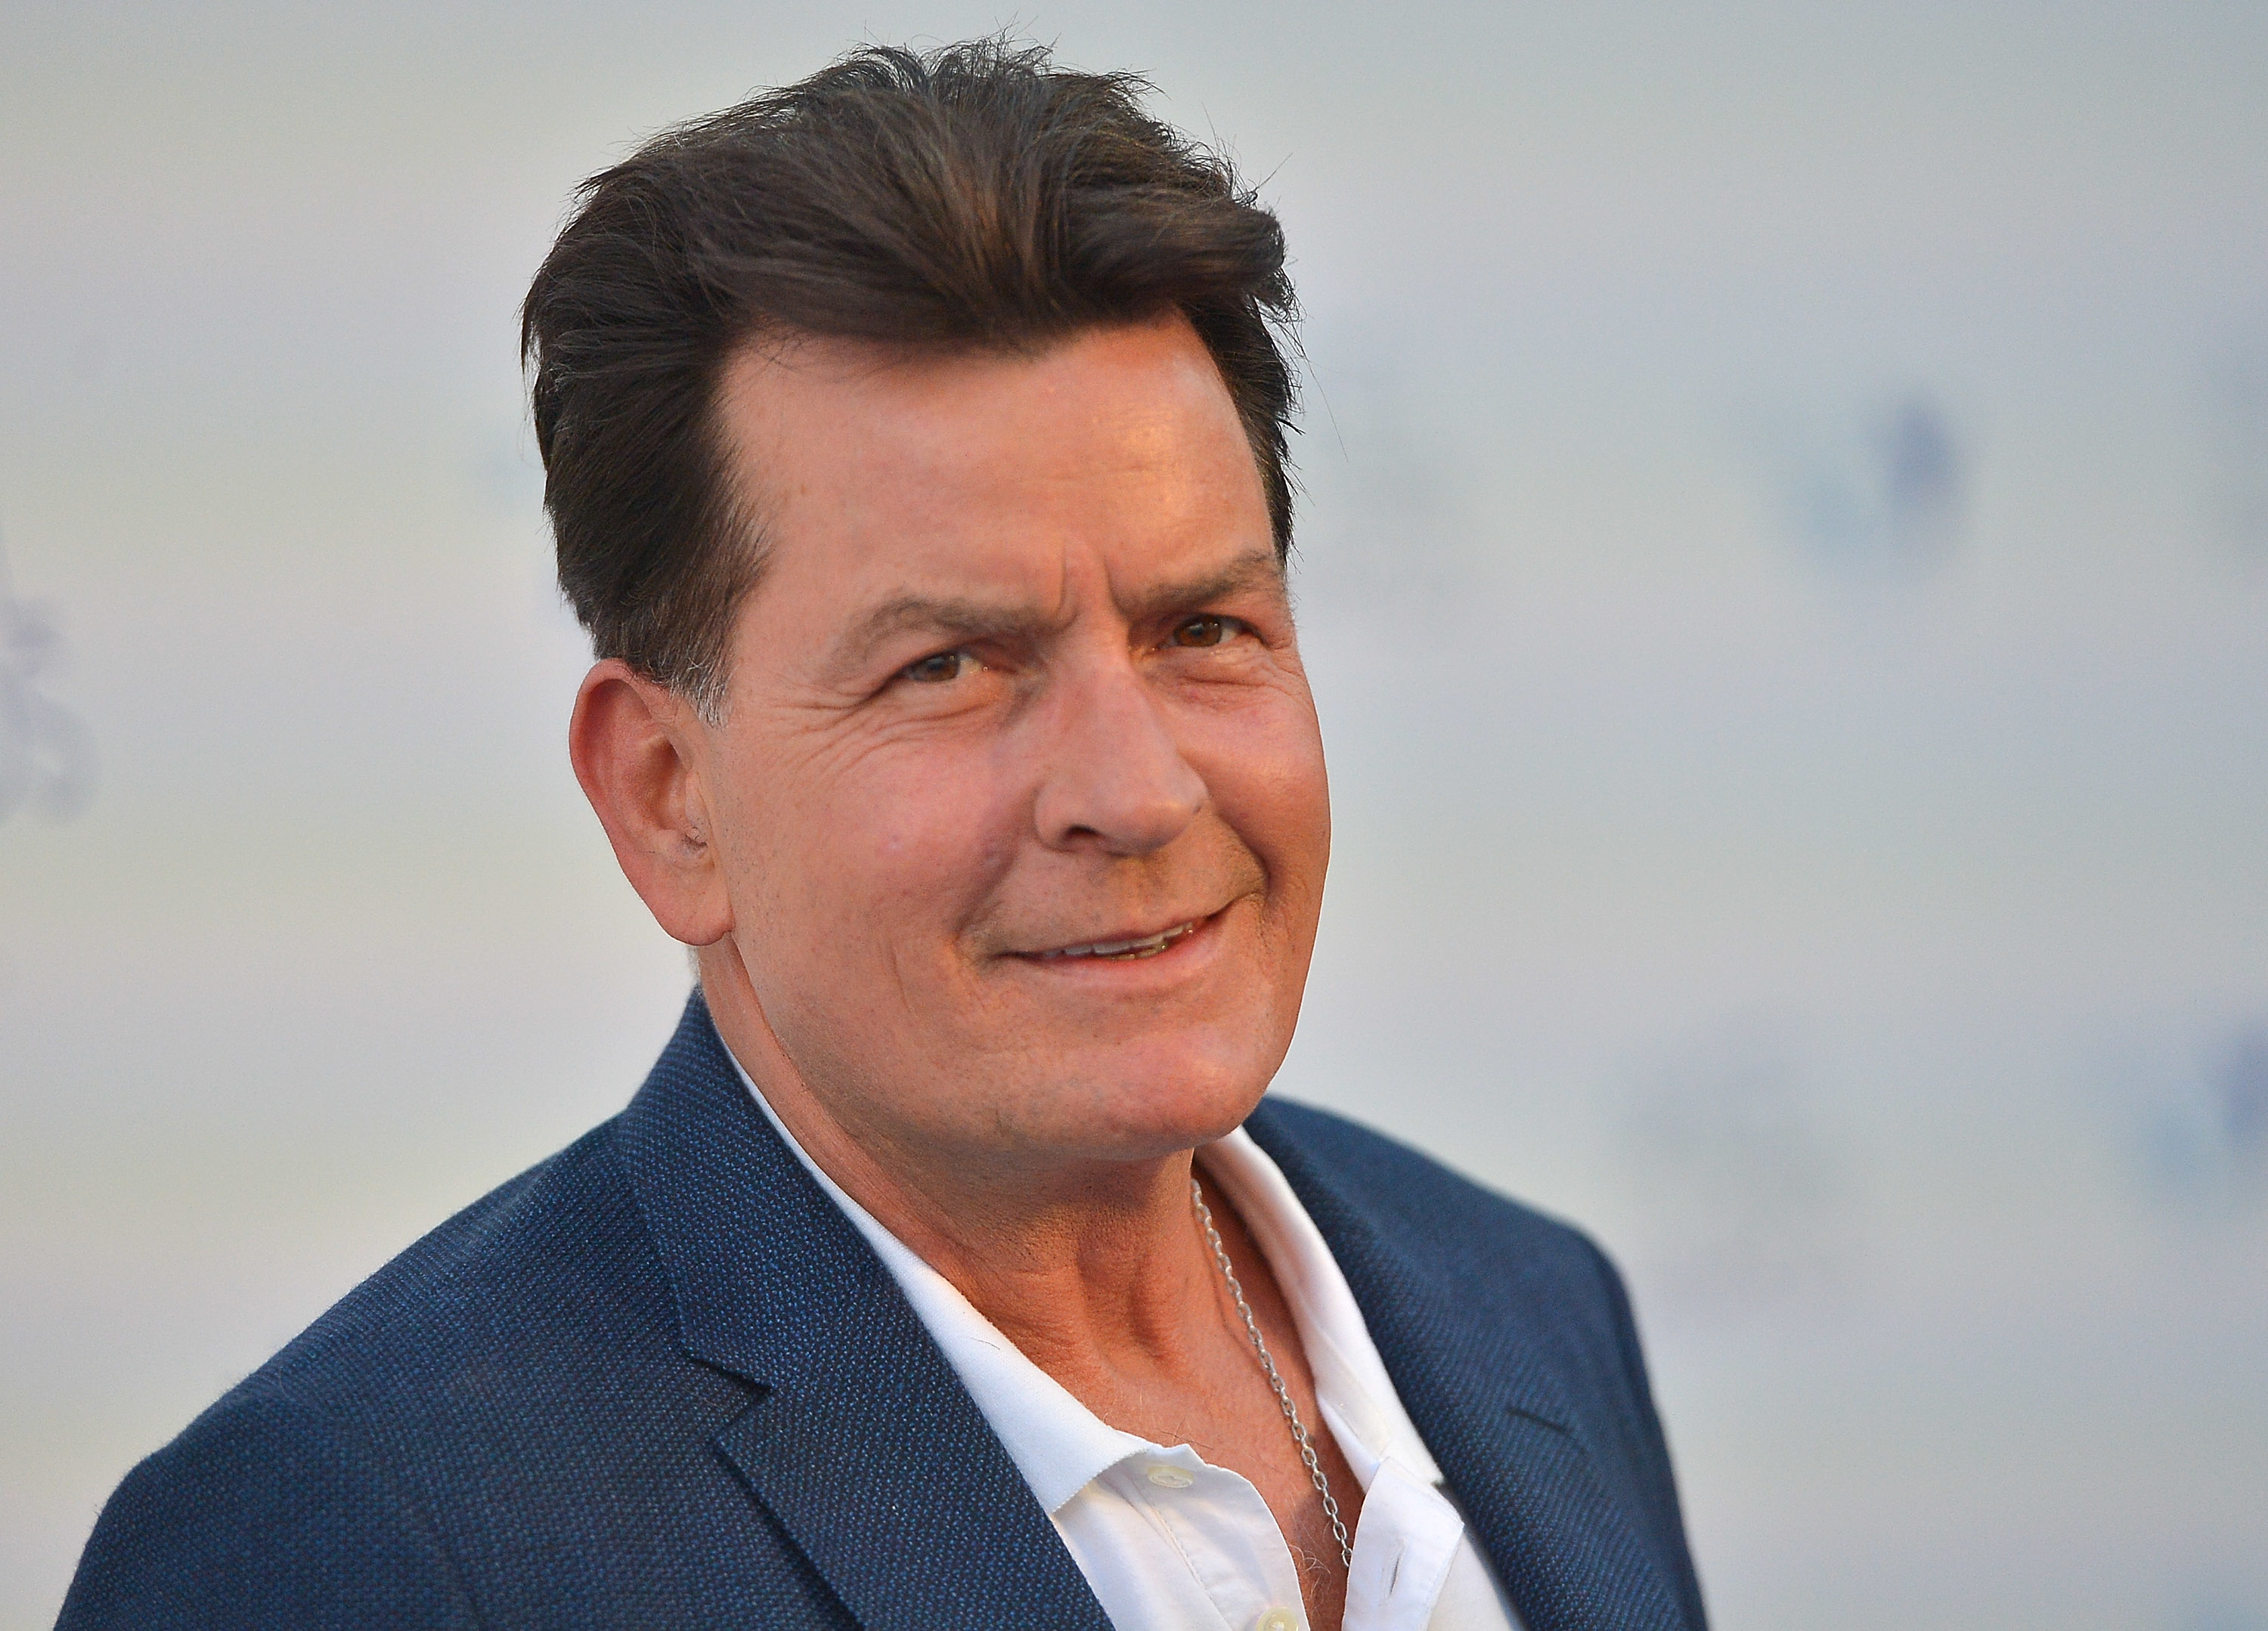 Closeup of Charlie Sheen at a media event